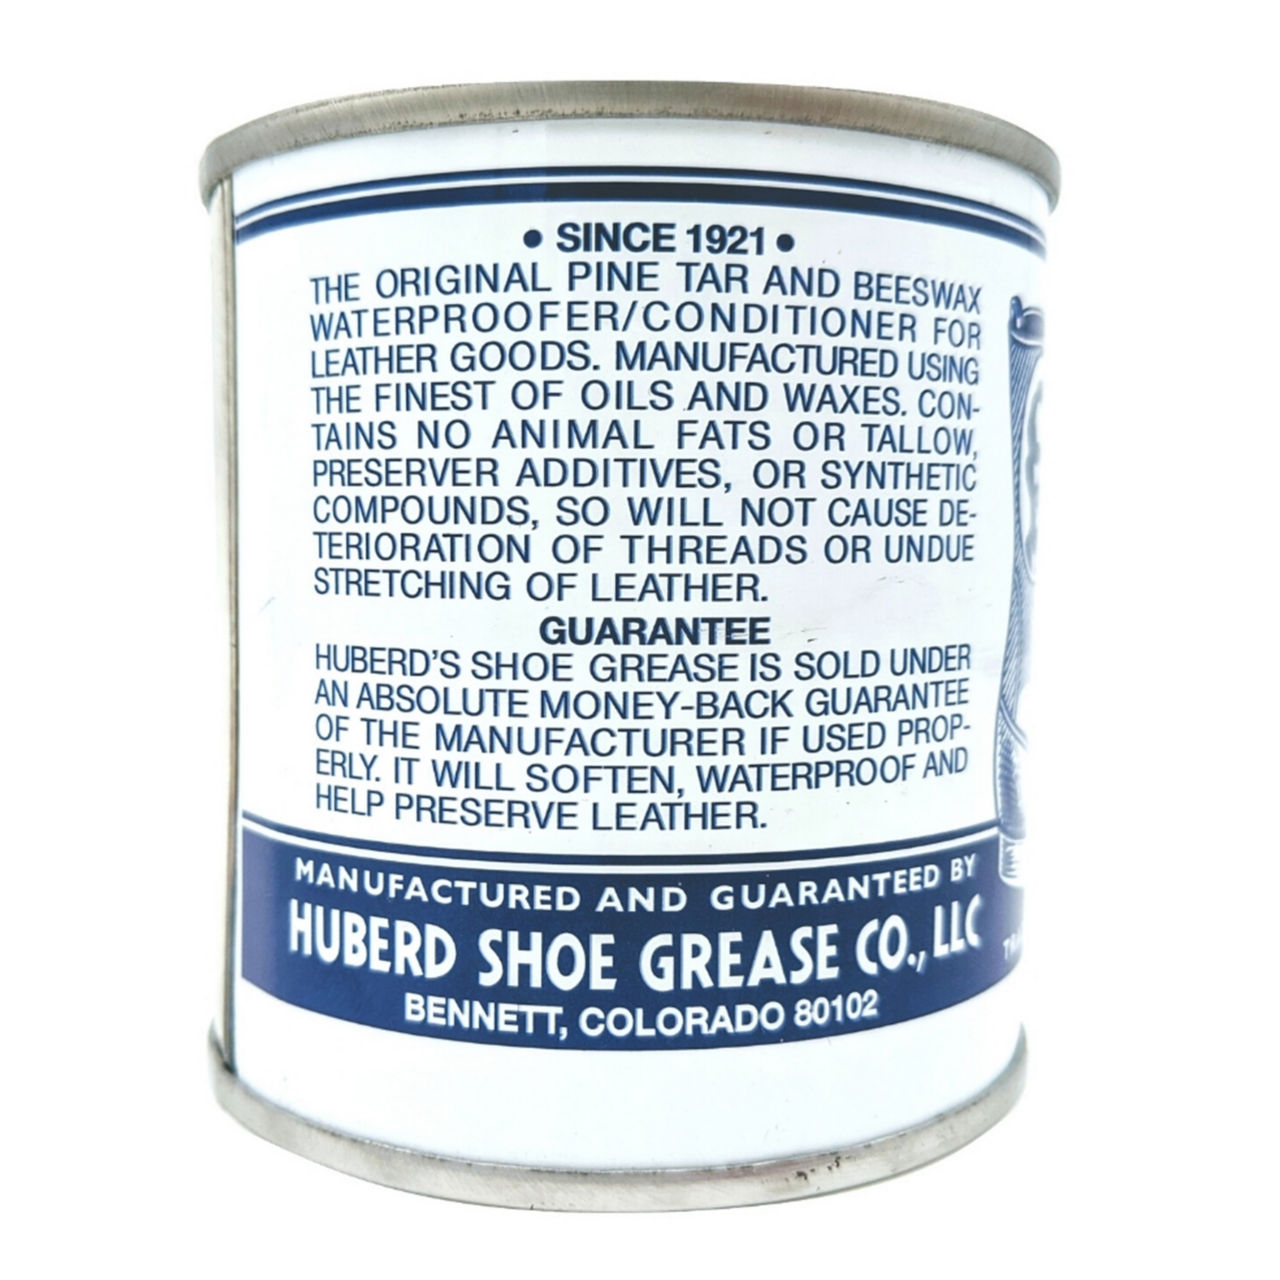 Huberd’s Shoe Grease -  image number 2